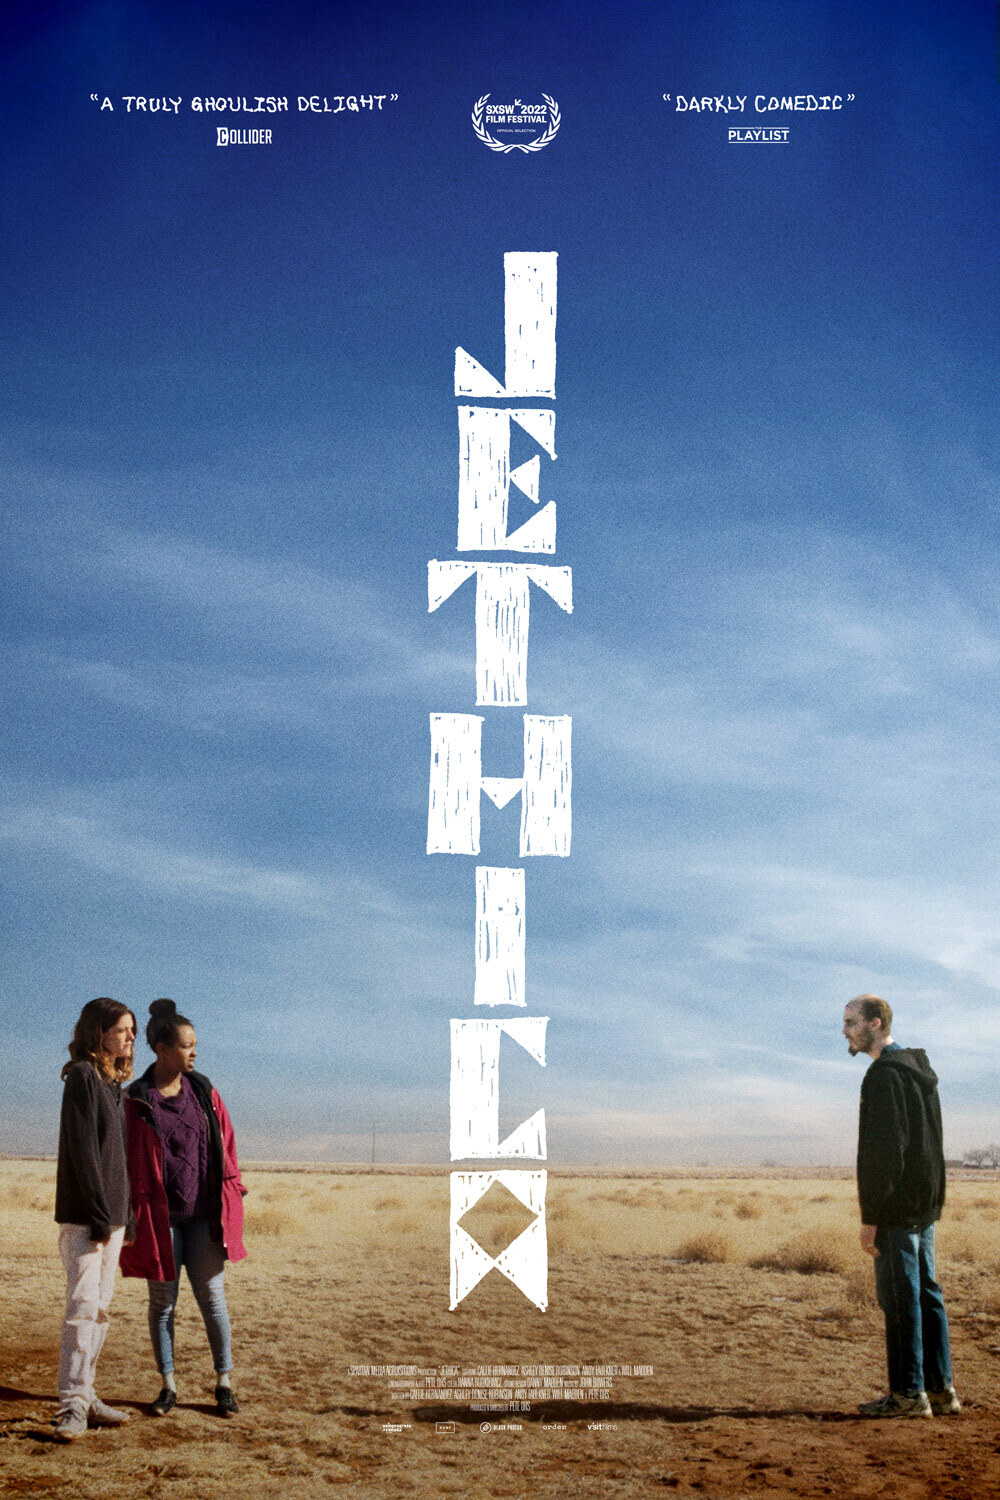 Movie poster for Jethica, two woman standing across from man in desert